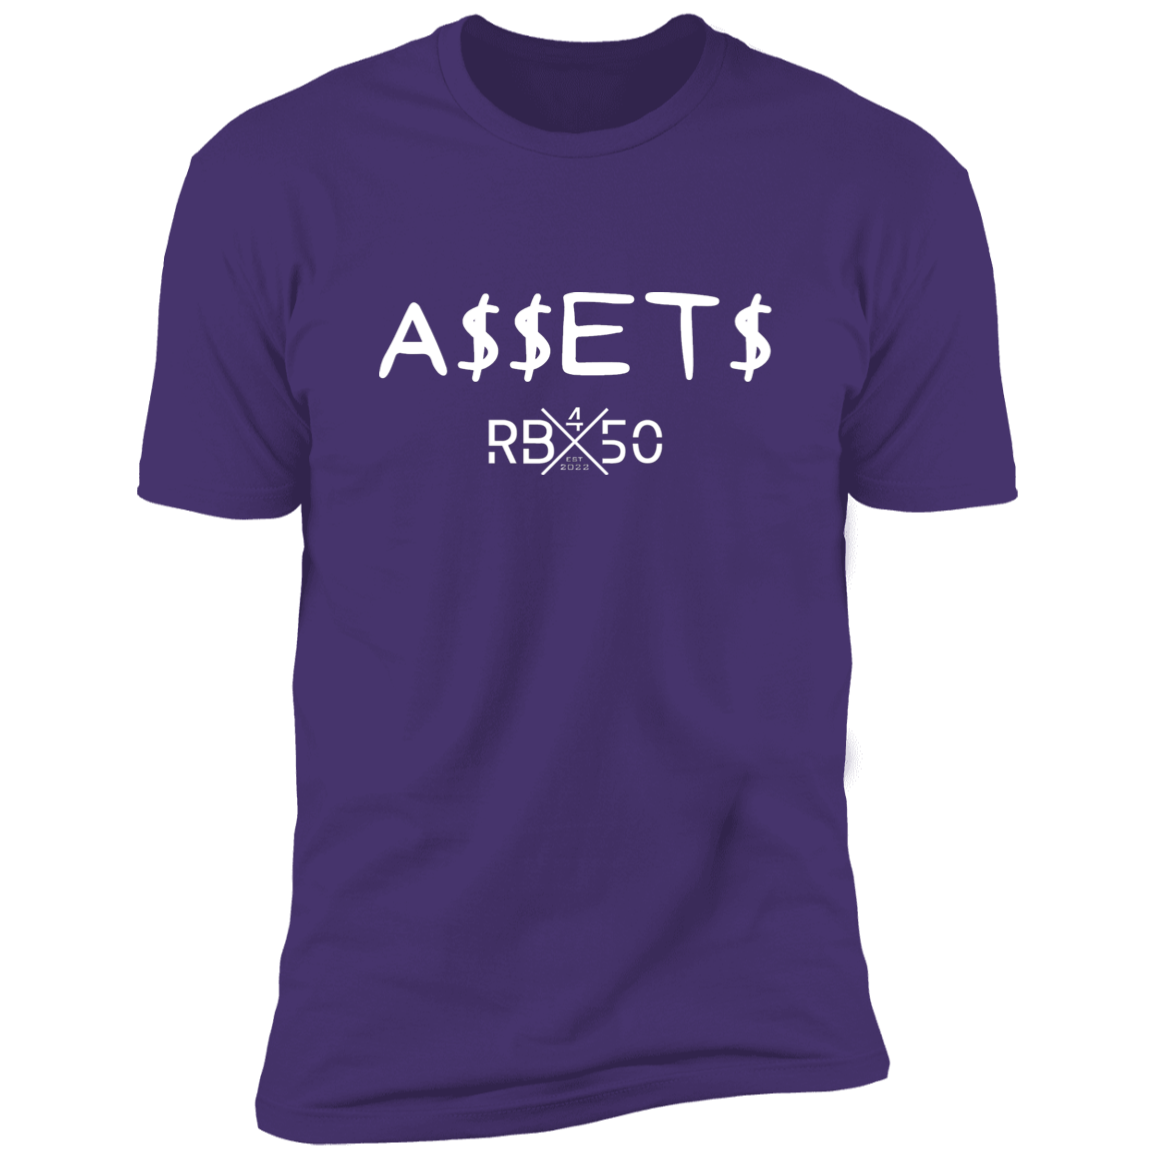 RB450 LIMITED A$$ET$ Short Sleeve Tee